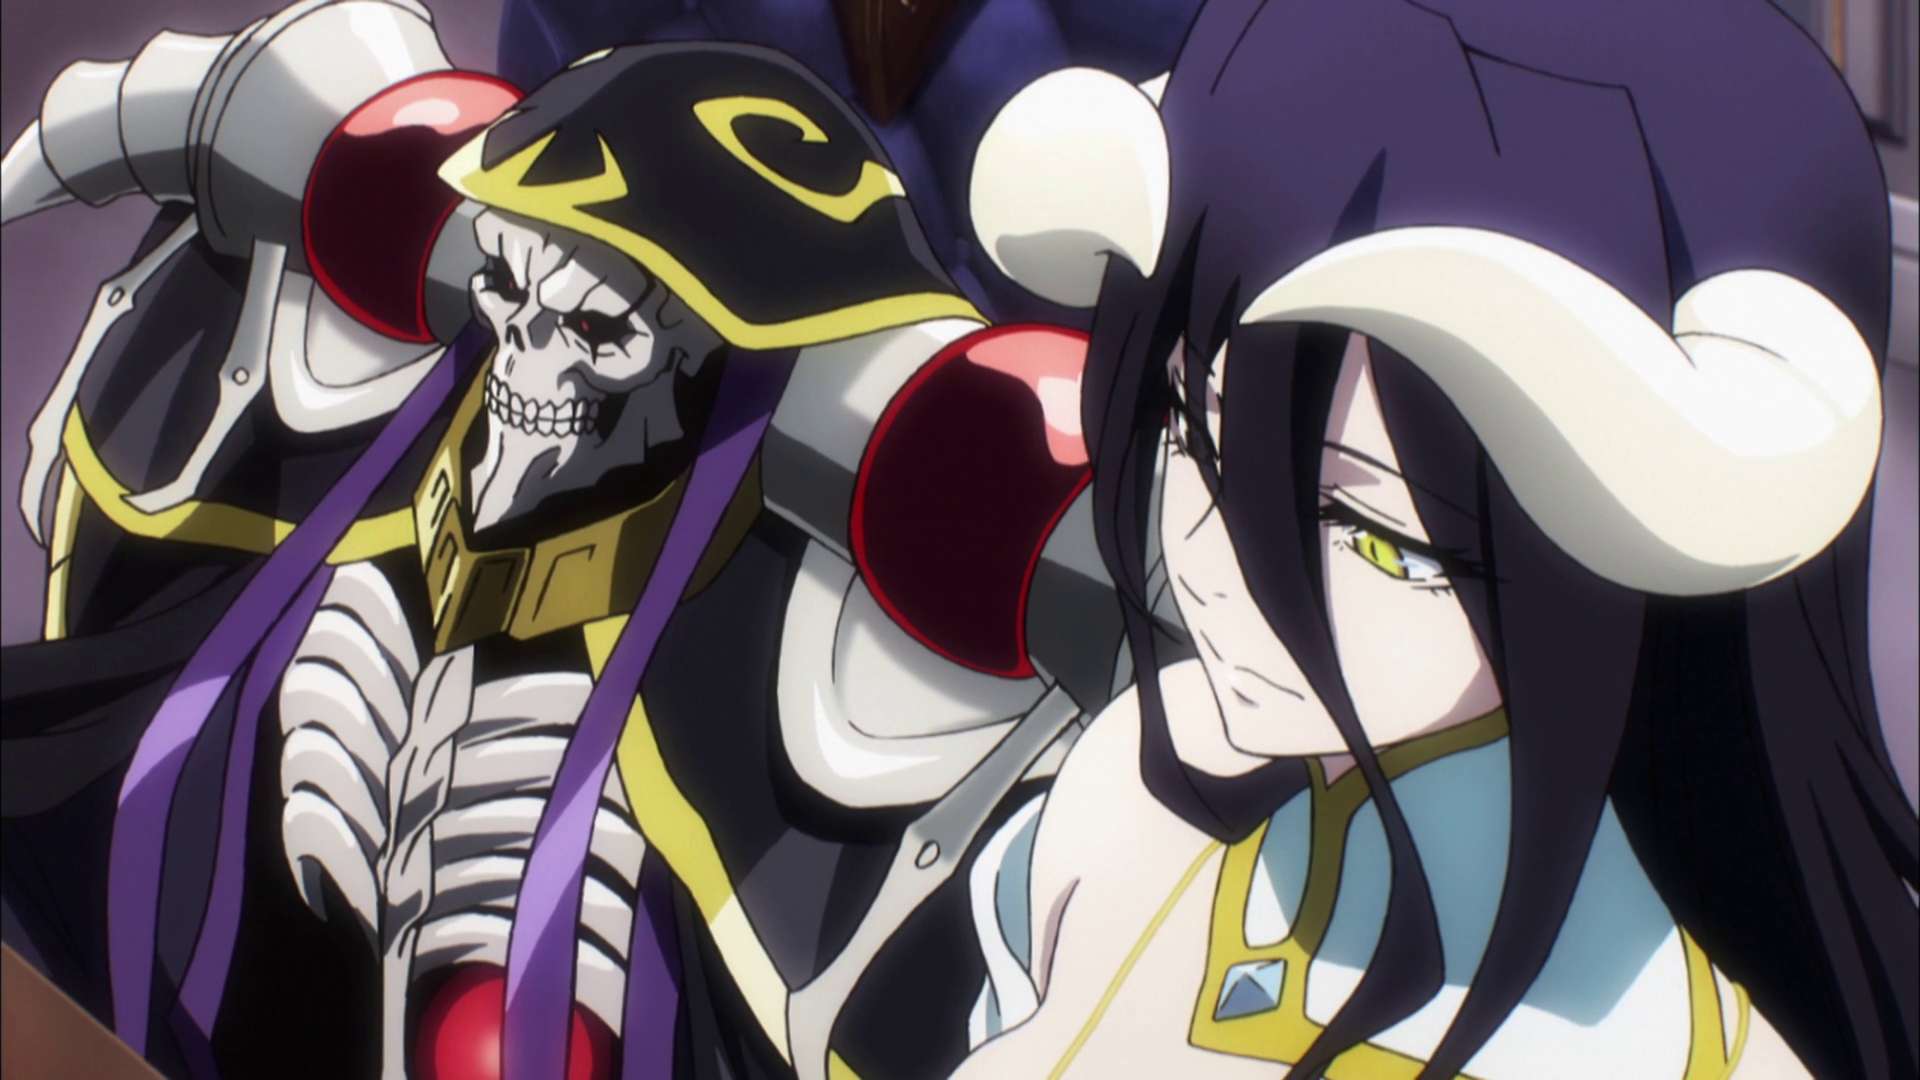 We’re back for a second season of Overlord, and the first two episodes have...